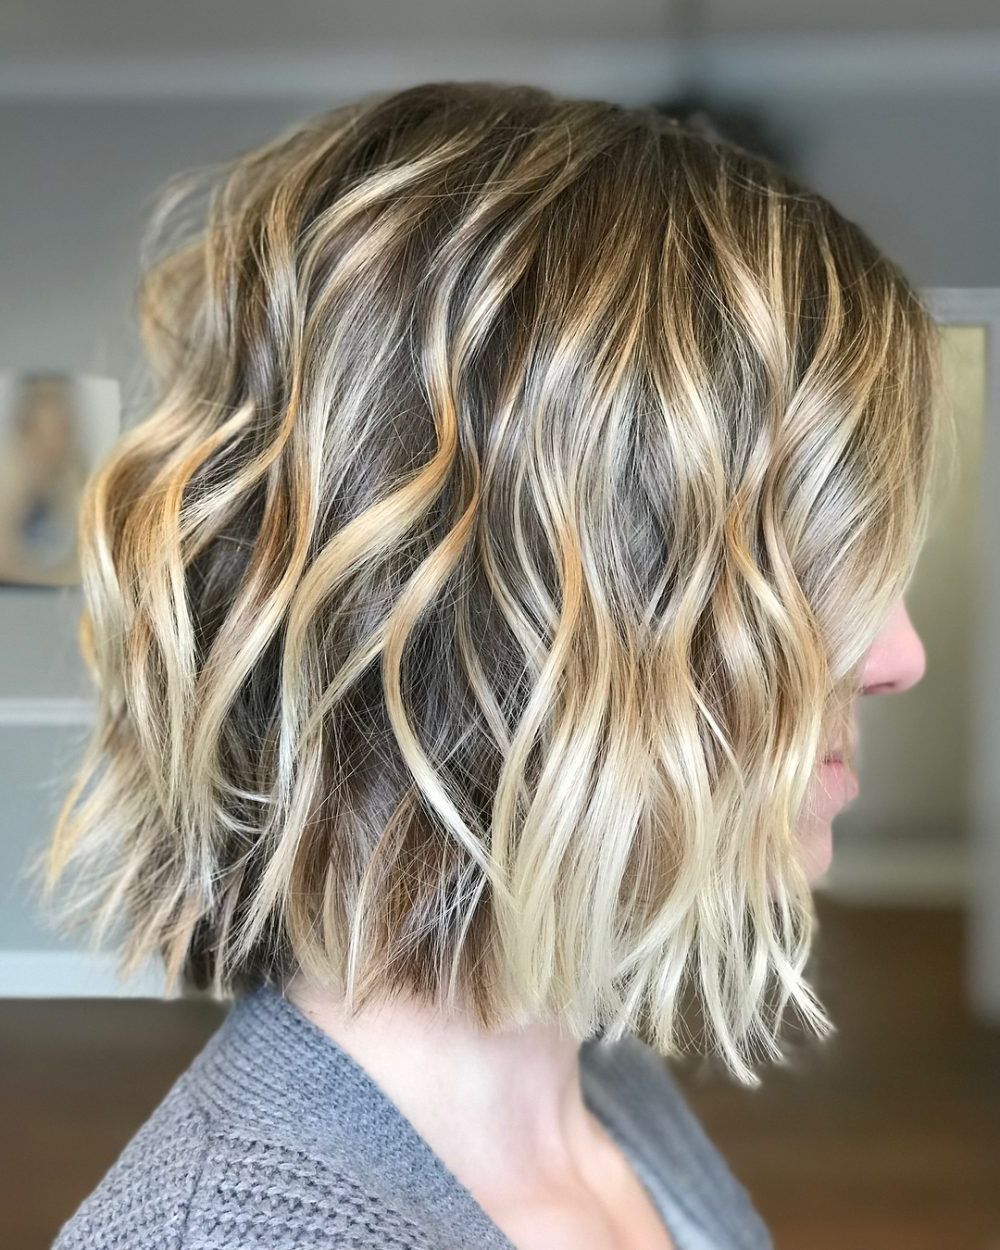 Top 22 Choppy Hairstyles You'll See In 2019 In Most Popular Medium Choppy Haircuts For Fine Hair (View 6 of 20)